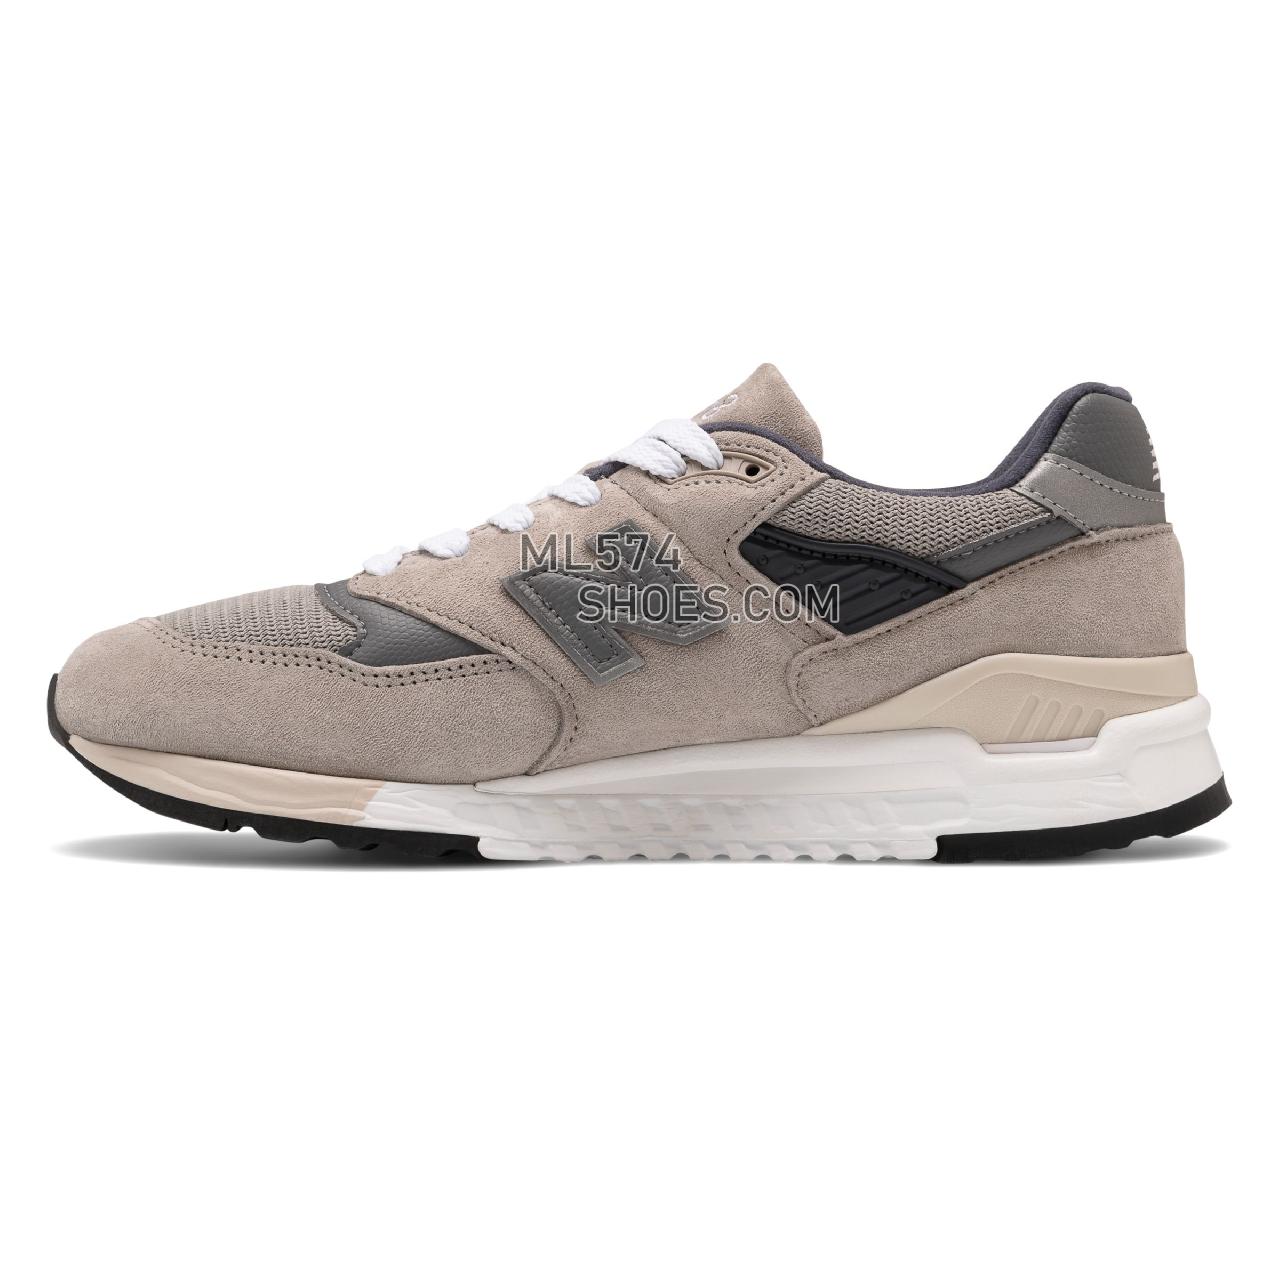 New Balance Made in US 998 - Men's Made in US 998 Classic ML998V1-27545-M - Grey with Light Grey - M998BLA